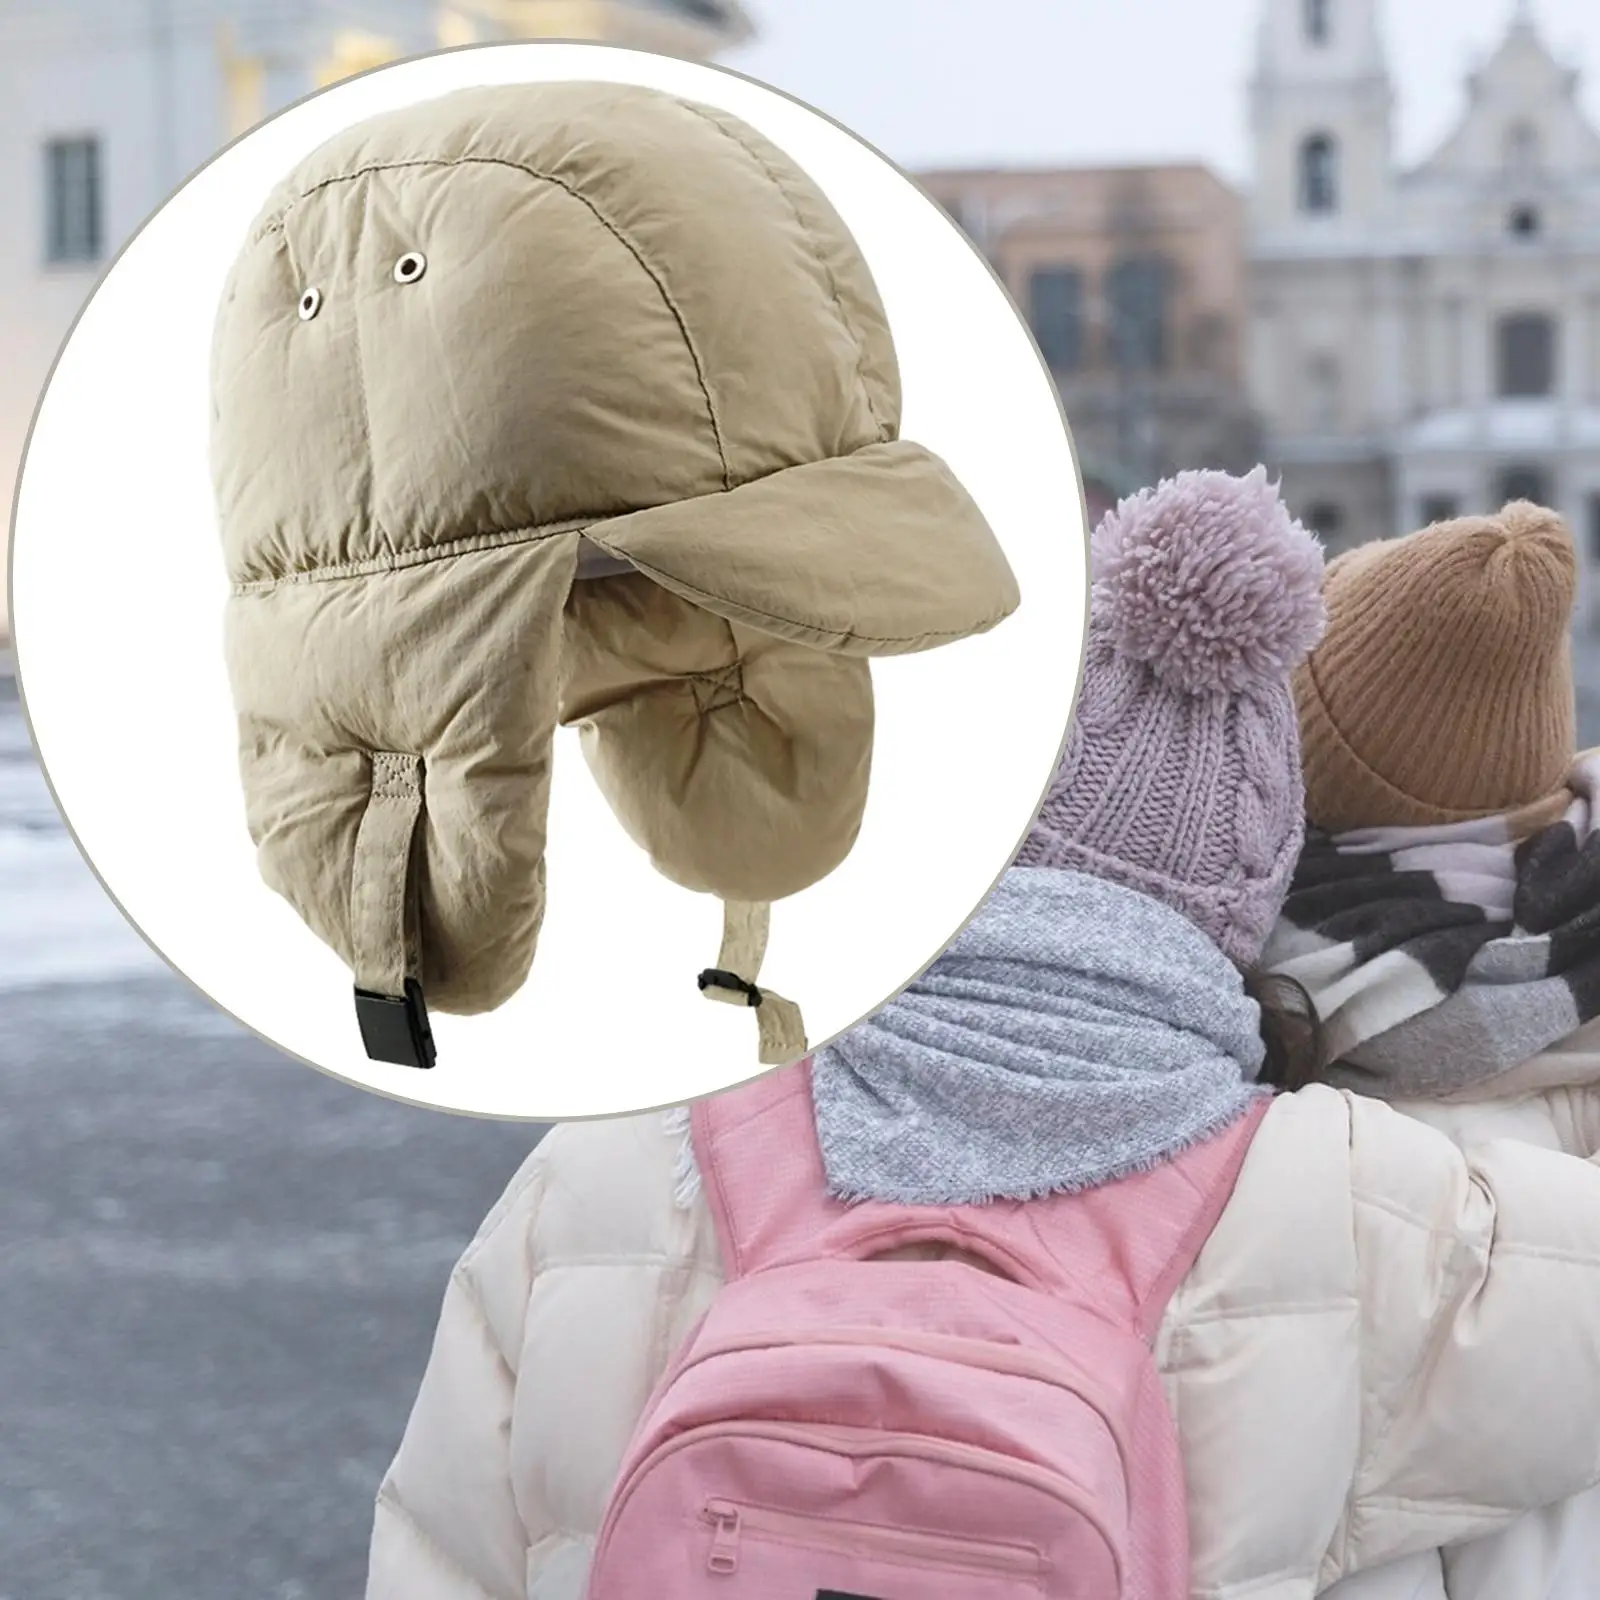 Hat with Earflaps Windproof for Women Baseball Cap Warm Hat Filled Hat Winter Hat for Cold Weather Hiking Camping Skiing Adults